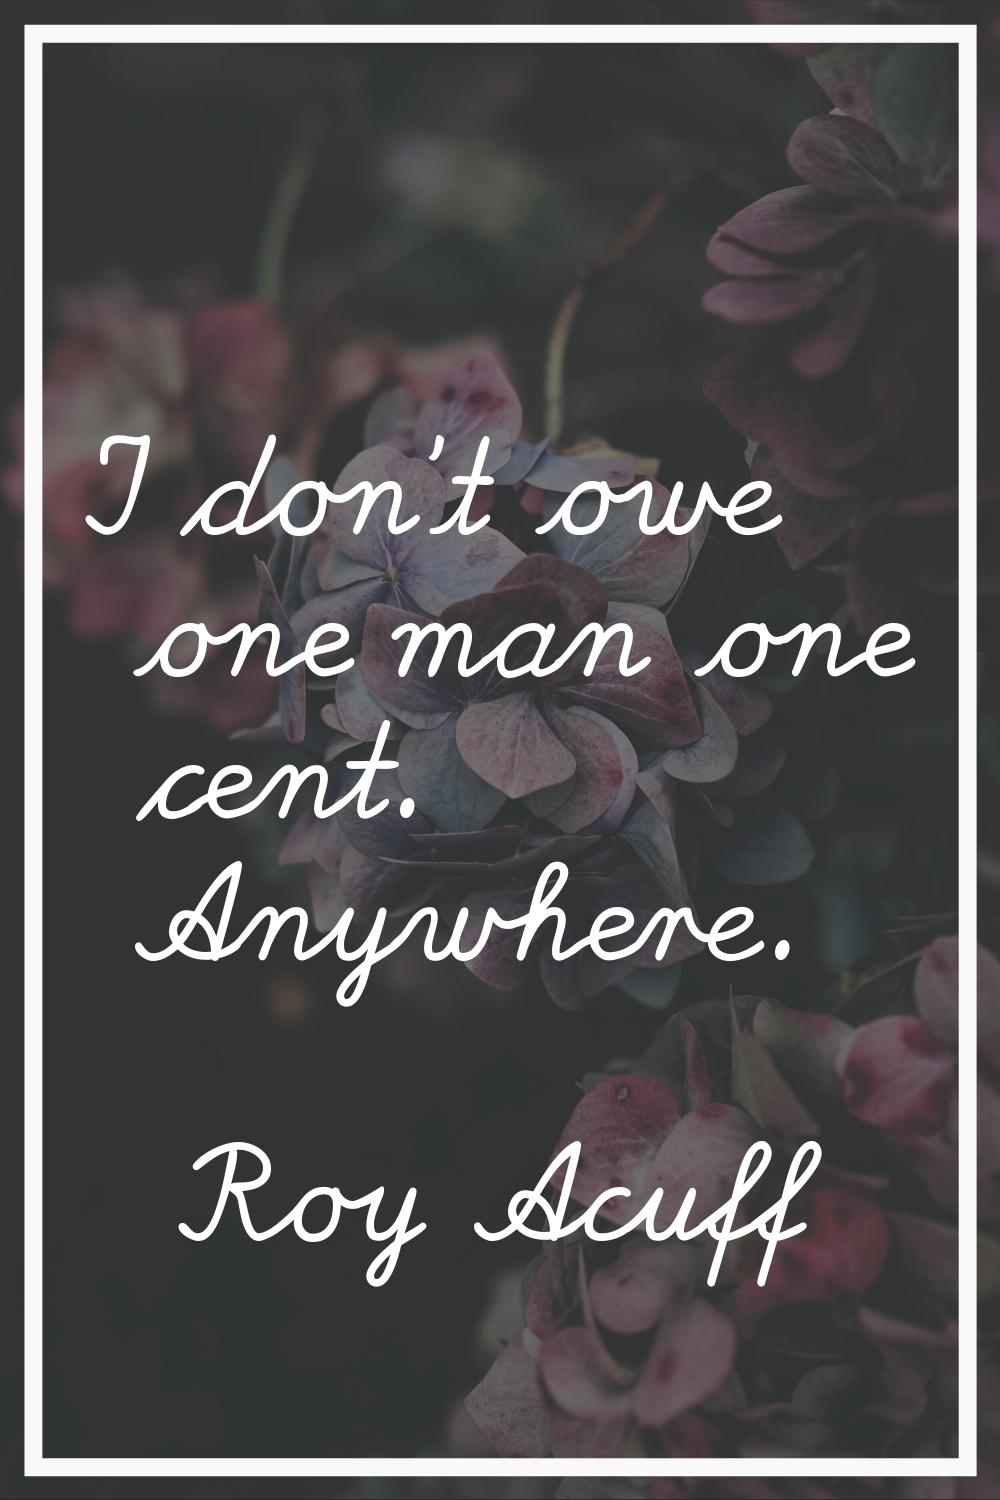 I don't owe one man one cent. Anywhere.